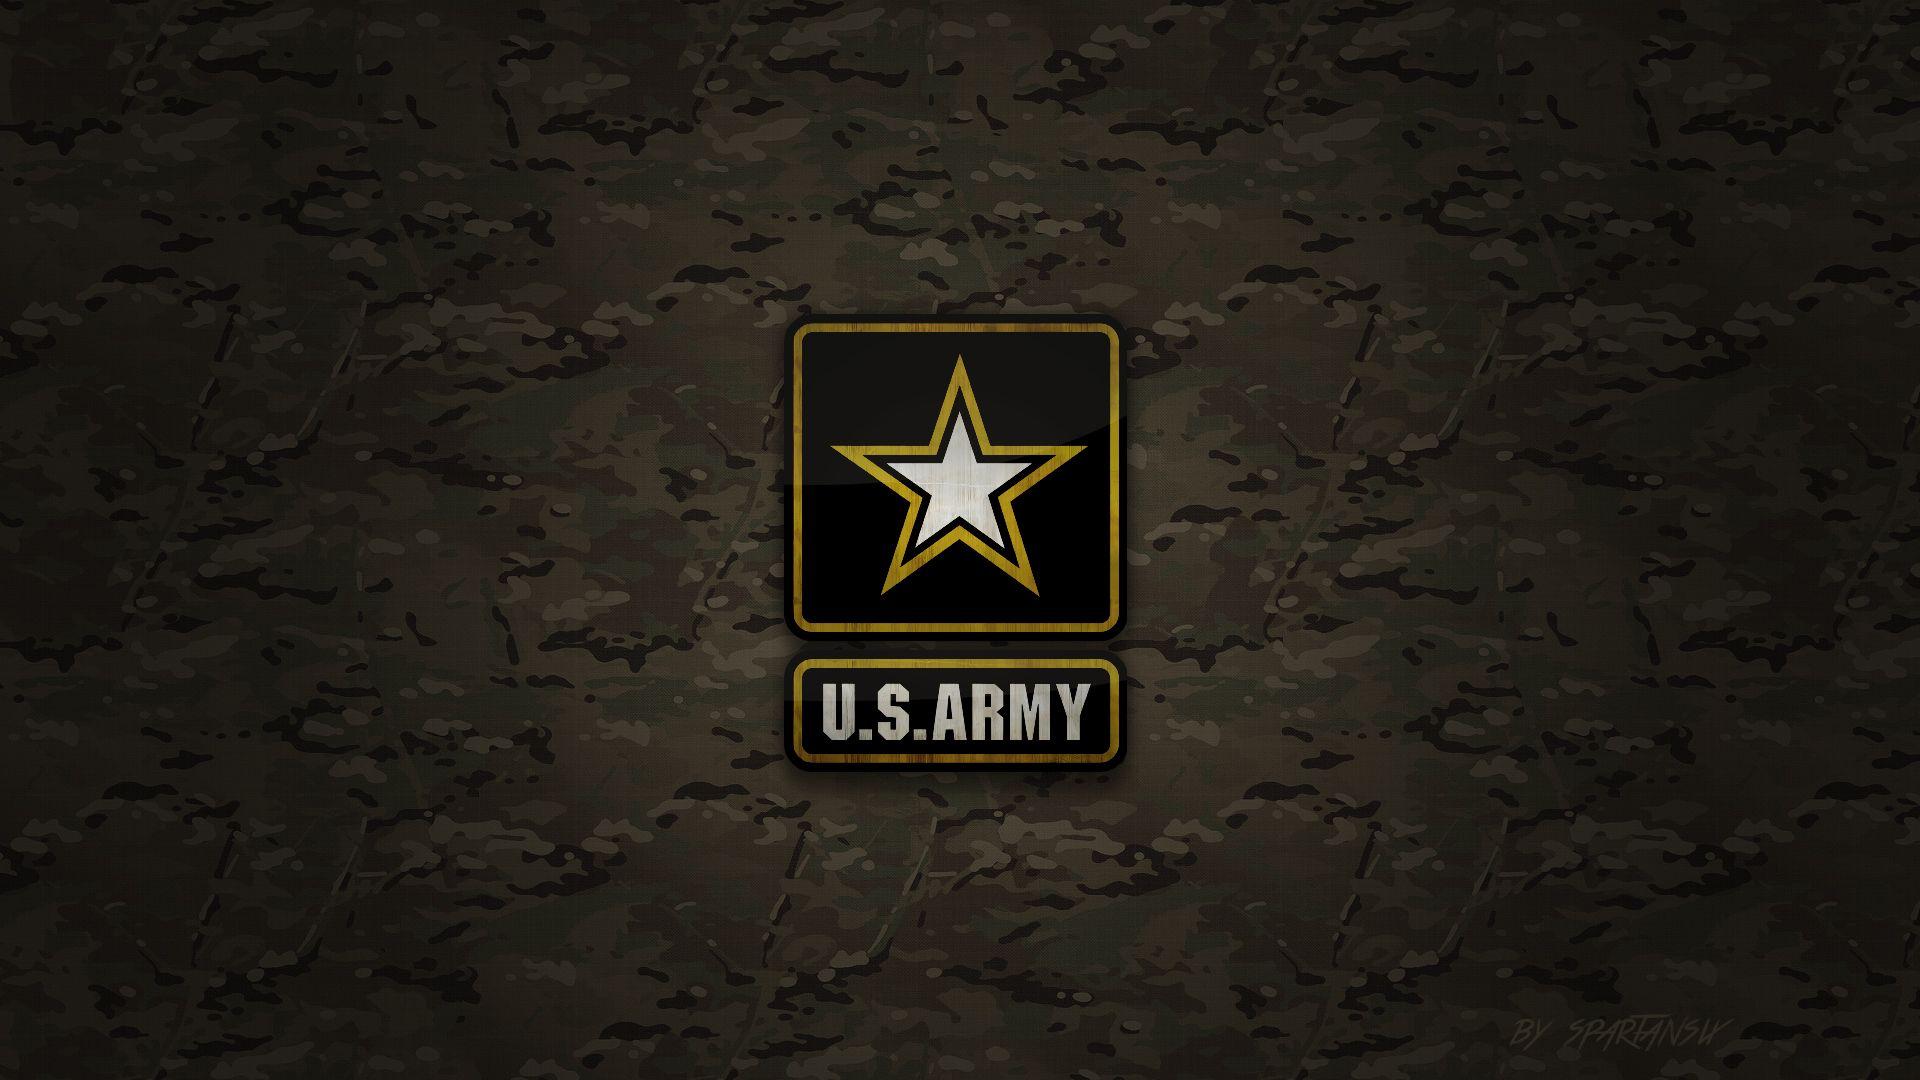 HD Army Wallpaper and Background Image For Download 1920×1080 Army